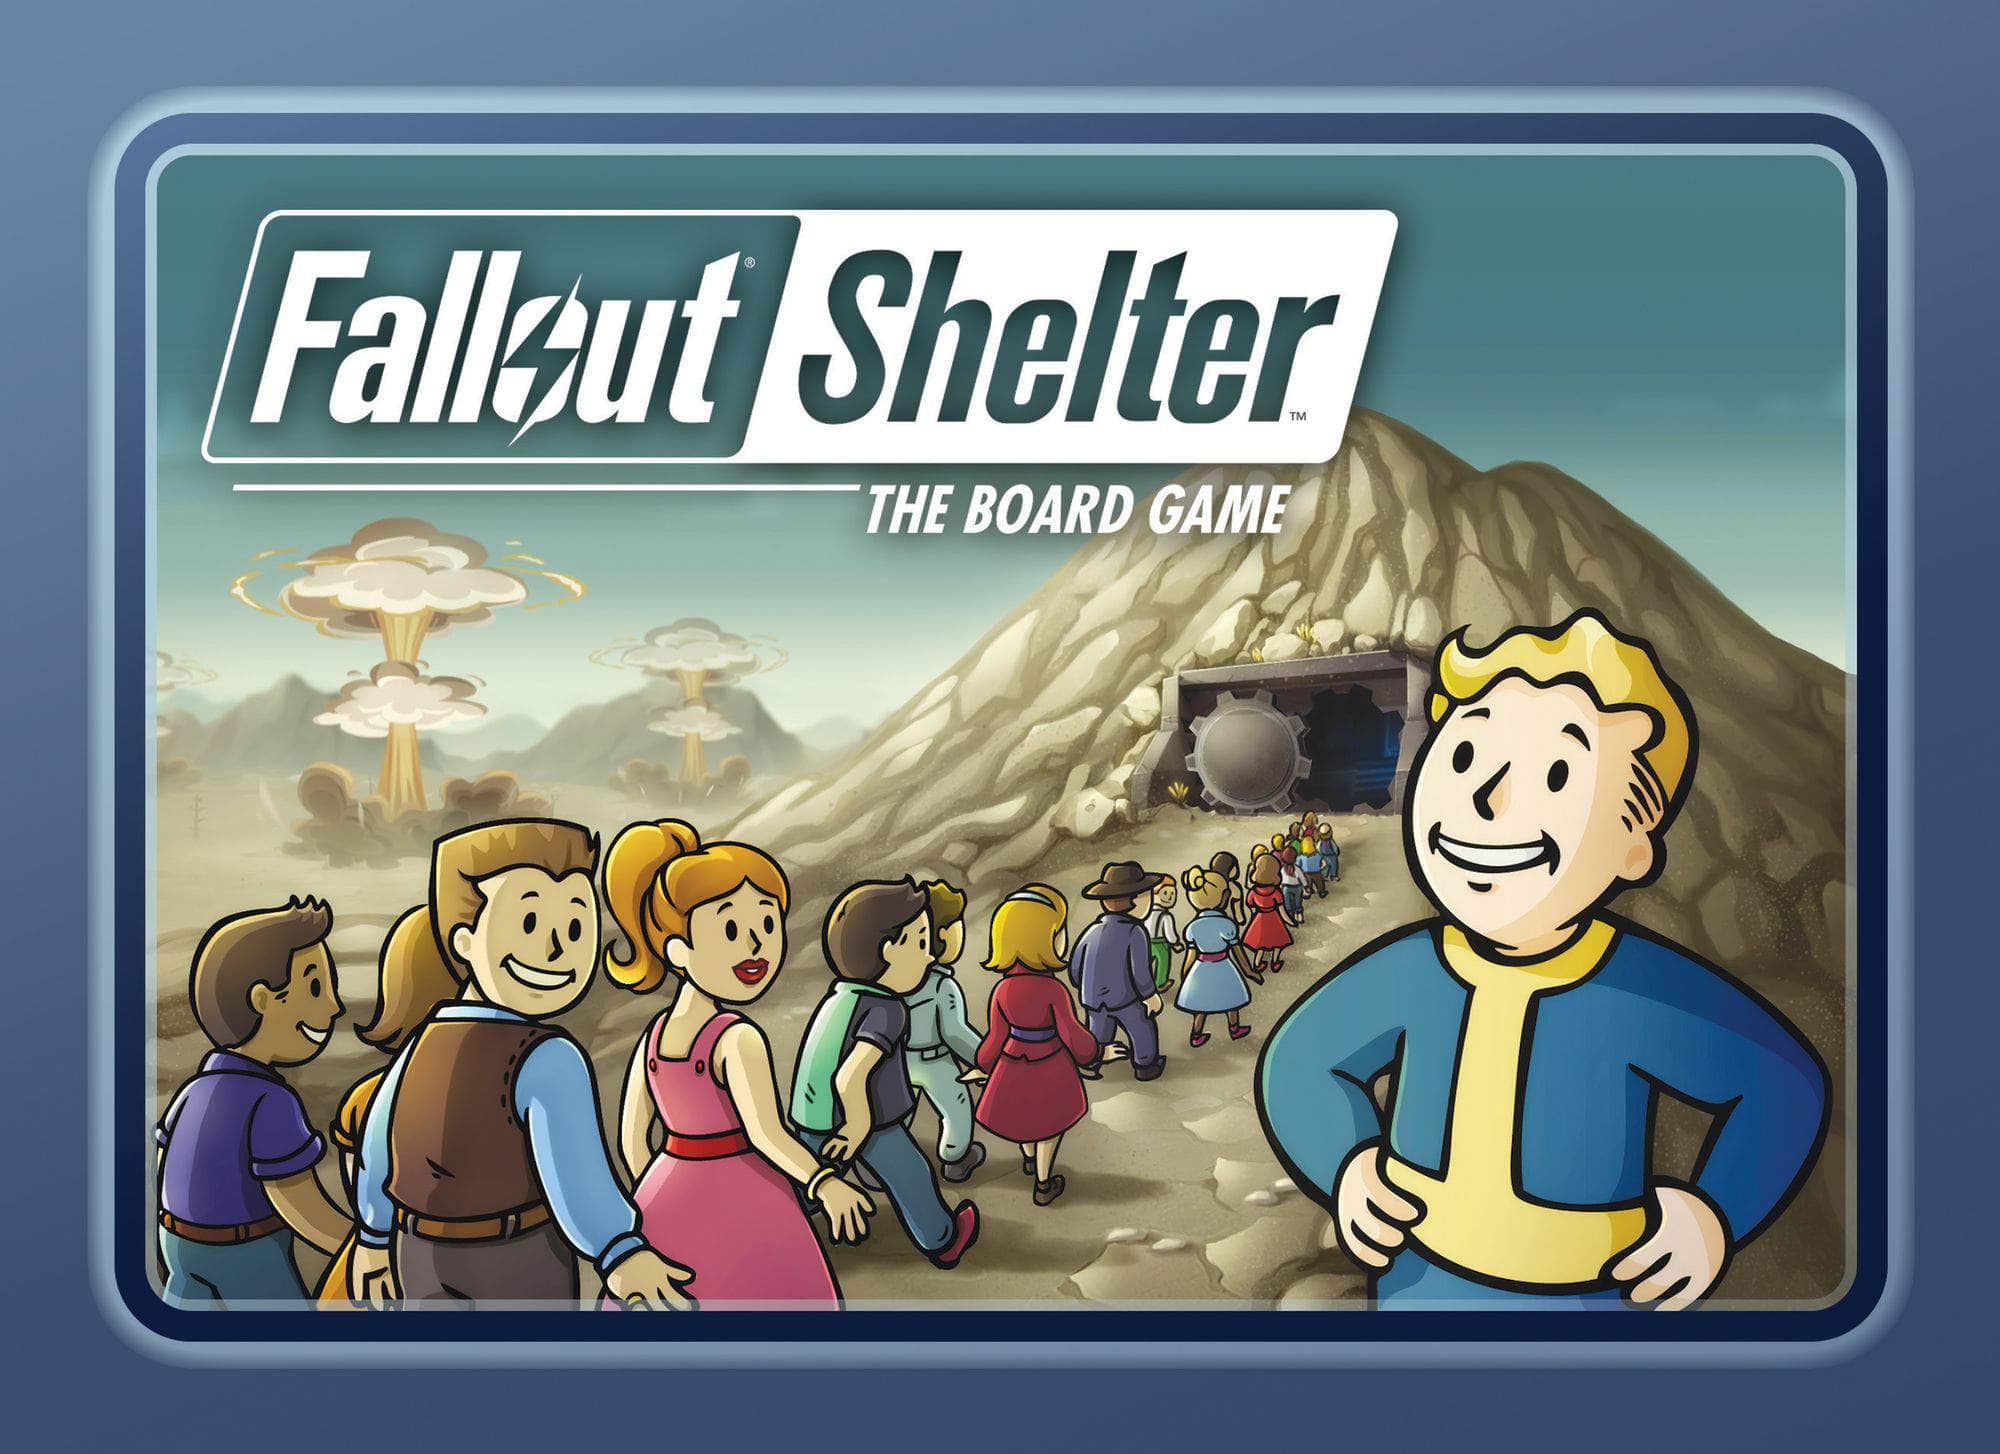 Fallout Shelter (Ding & Dent) (Retail Edition) เกมกระดานค้าปลีก Fantasy Flight Games 0841333110765 KS800683A